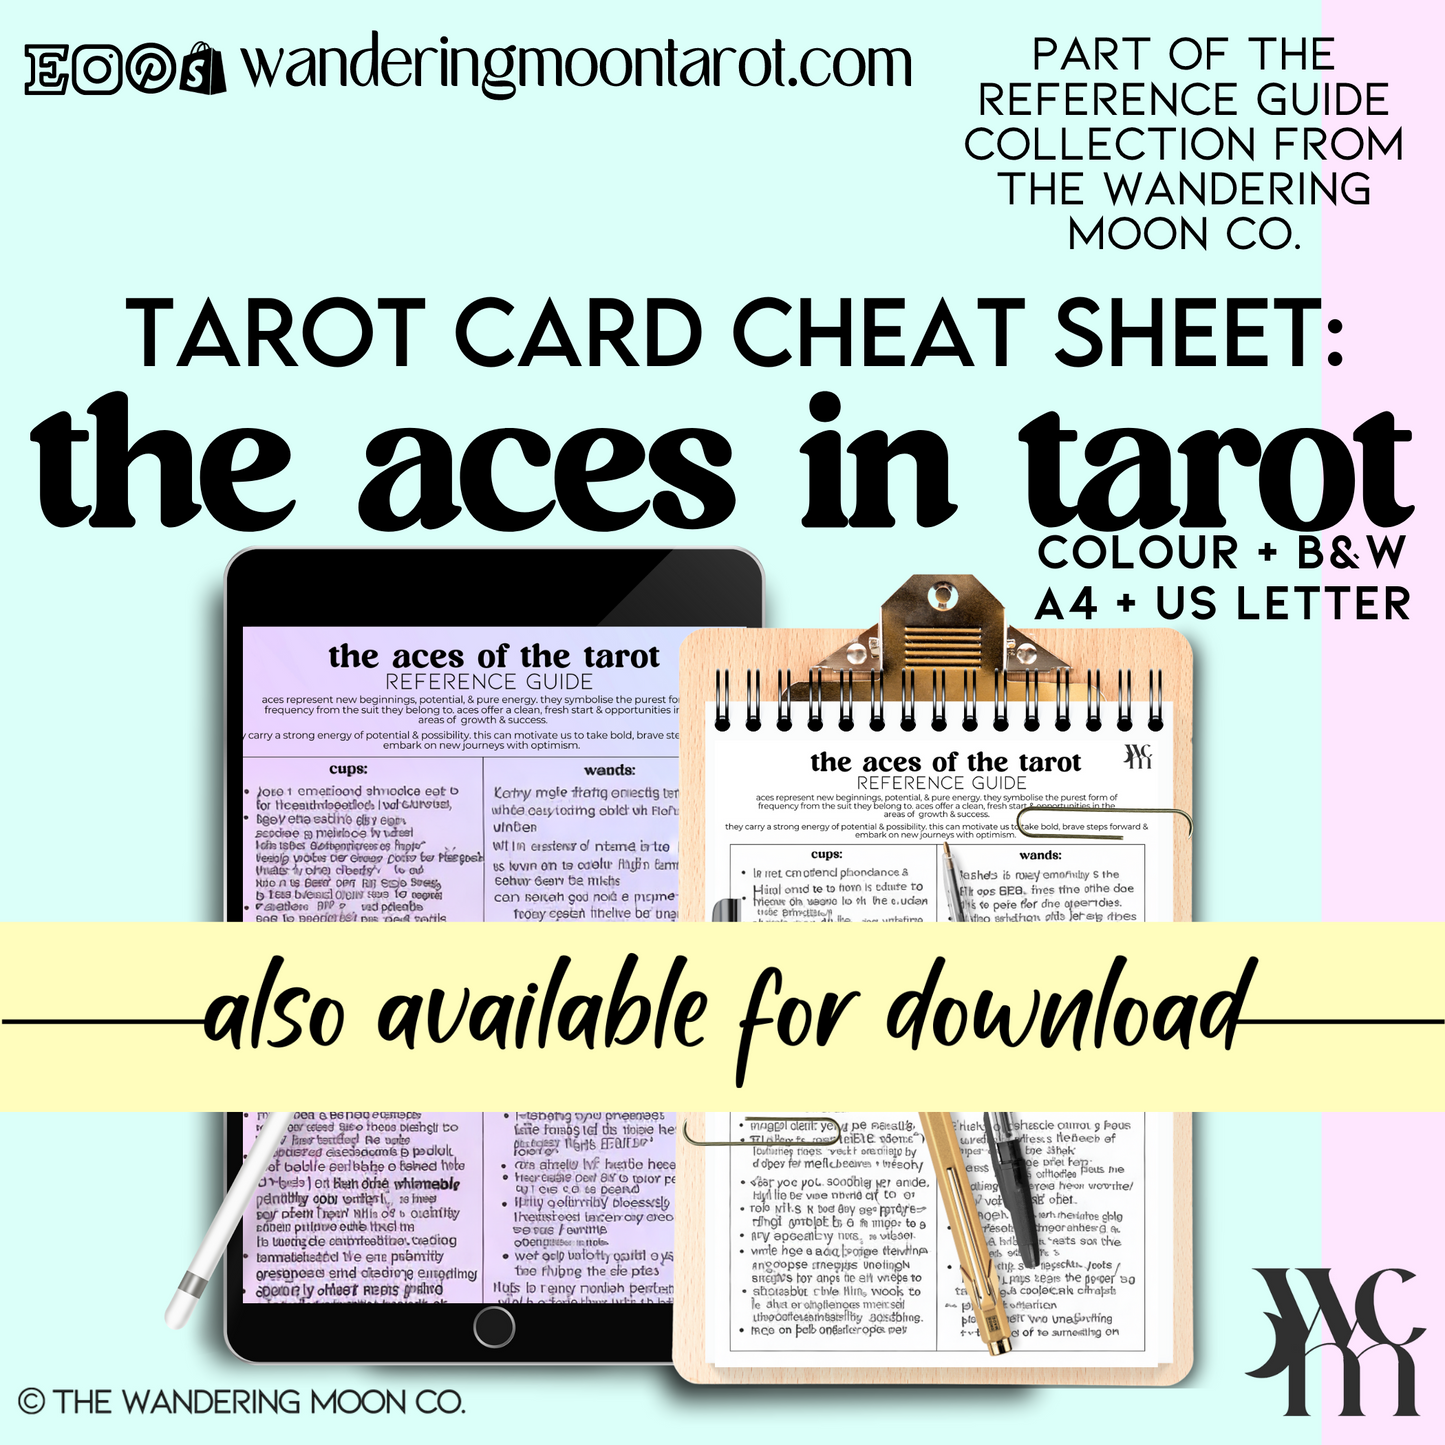 Tarot cards and Numerology cheat sheet - Reference guide PDF - Instant access - Learn Numerology - The Wandering Moon Co.